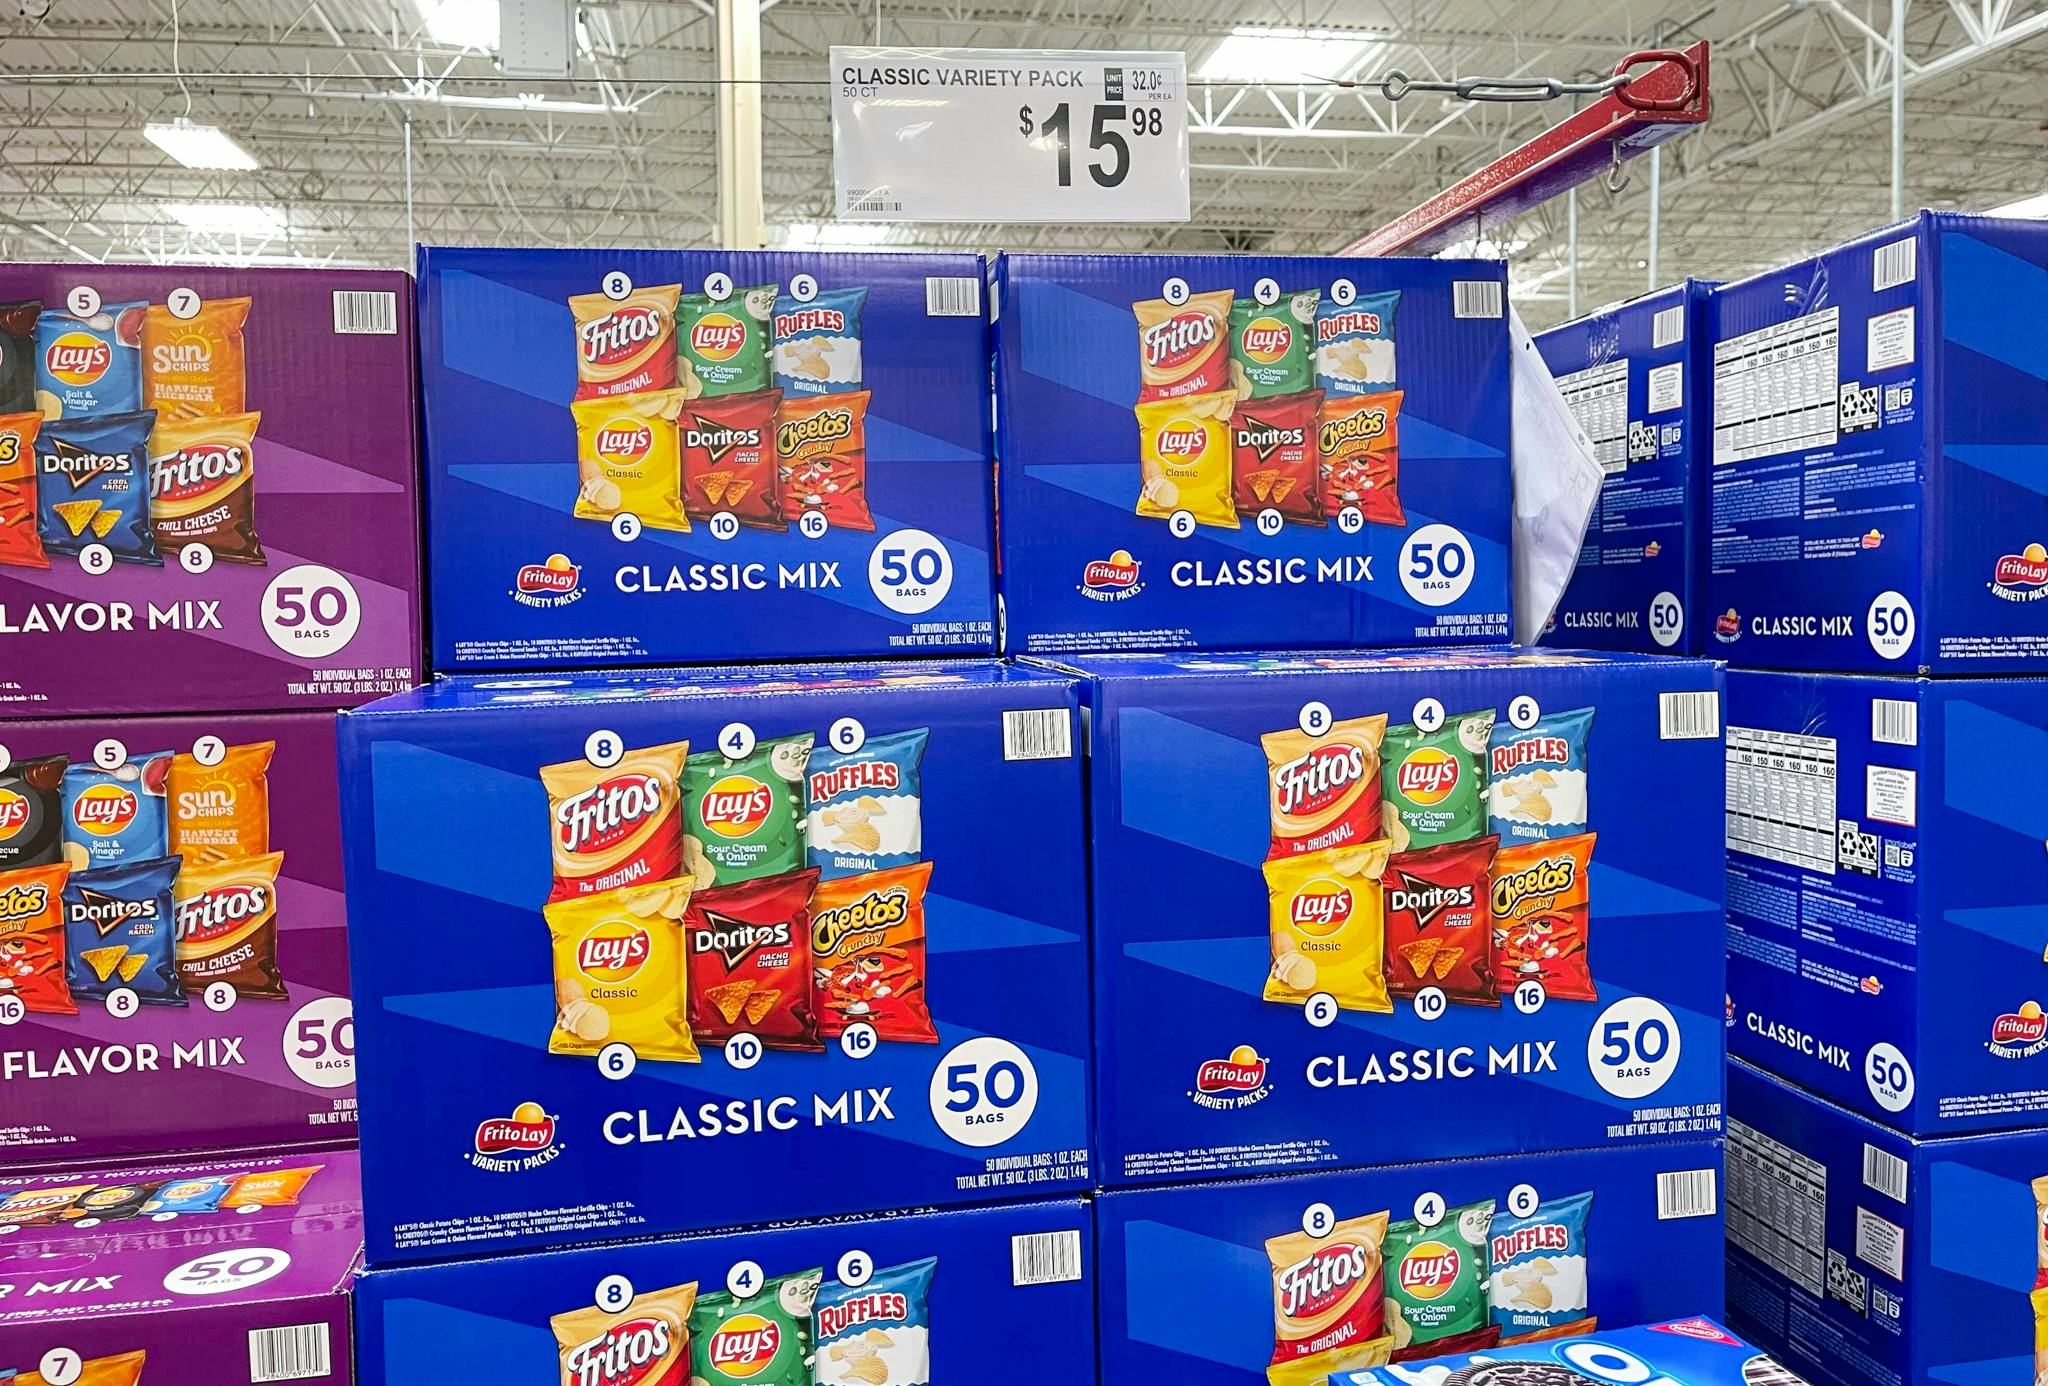 Boxes of Frito-Lay classic mix chips stocked on the sales floor at Sam's Club.